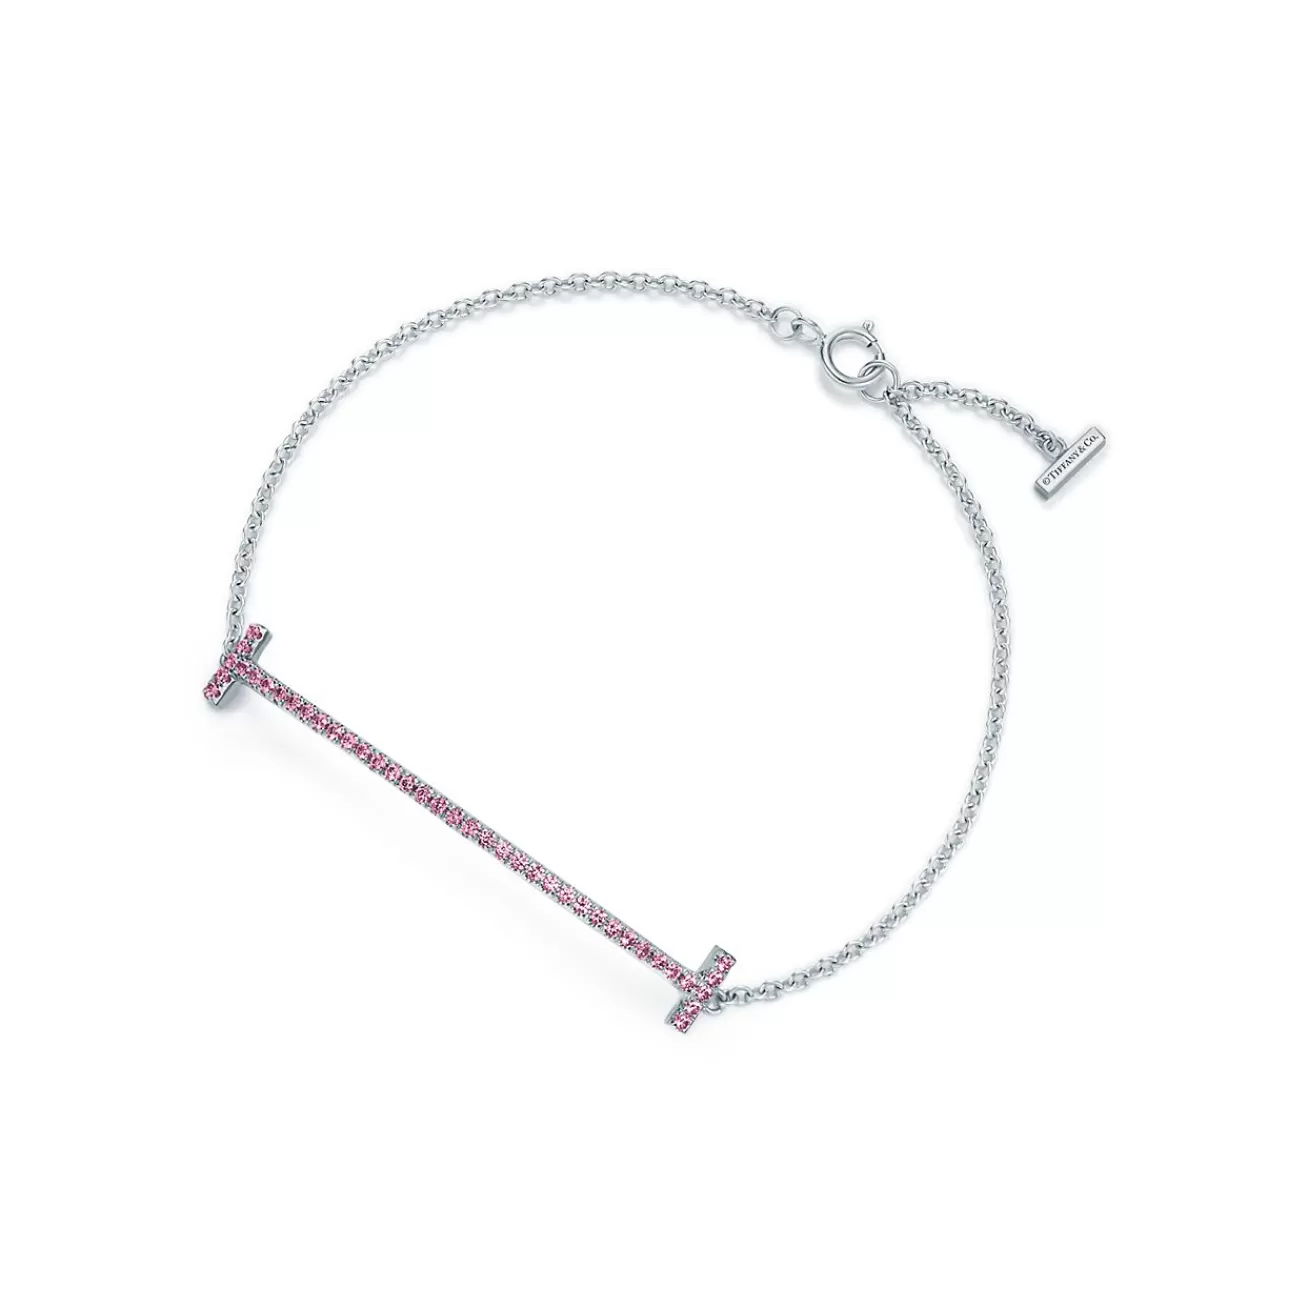 Tiffany & Co. Tiffany T Smile Chain Bracelet in White Gold with Pink Sapphires | ^ Bracelets | Colored Gemstone Jewelry